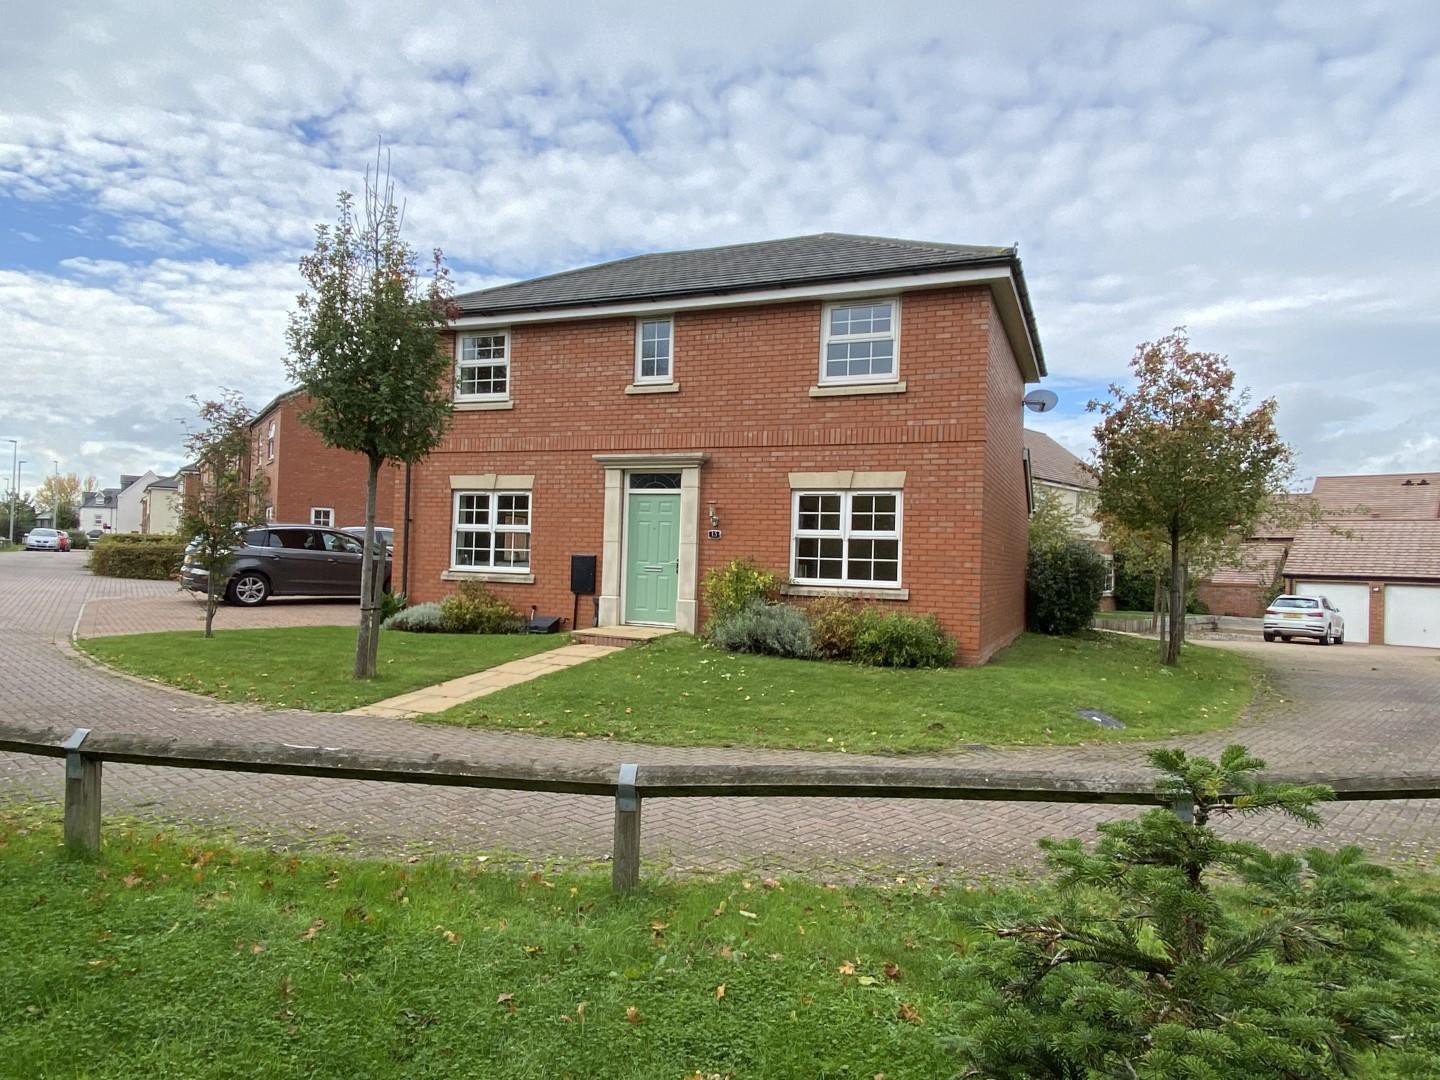 15 Old Bromley Lane, The Furlongs, Hereford